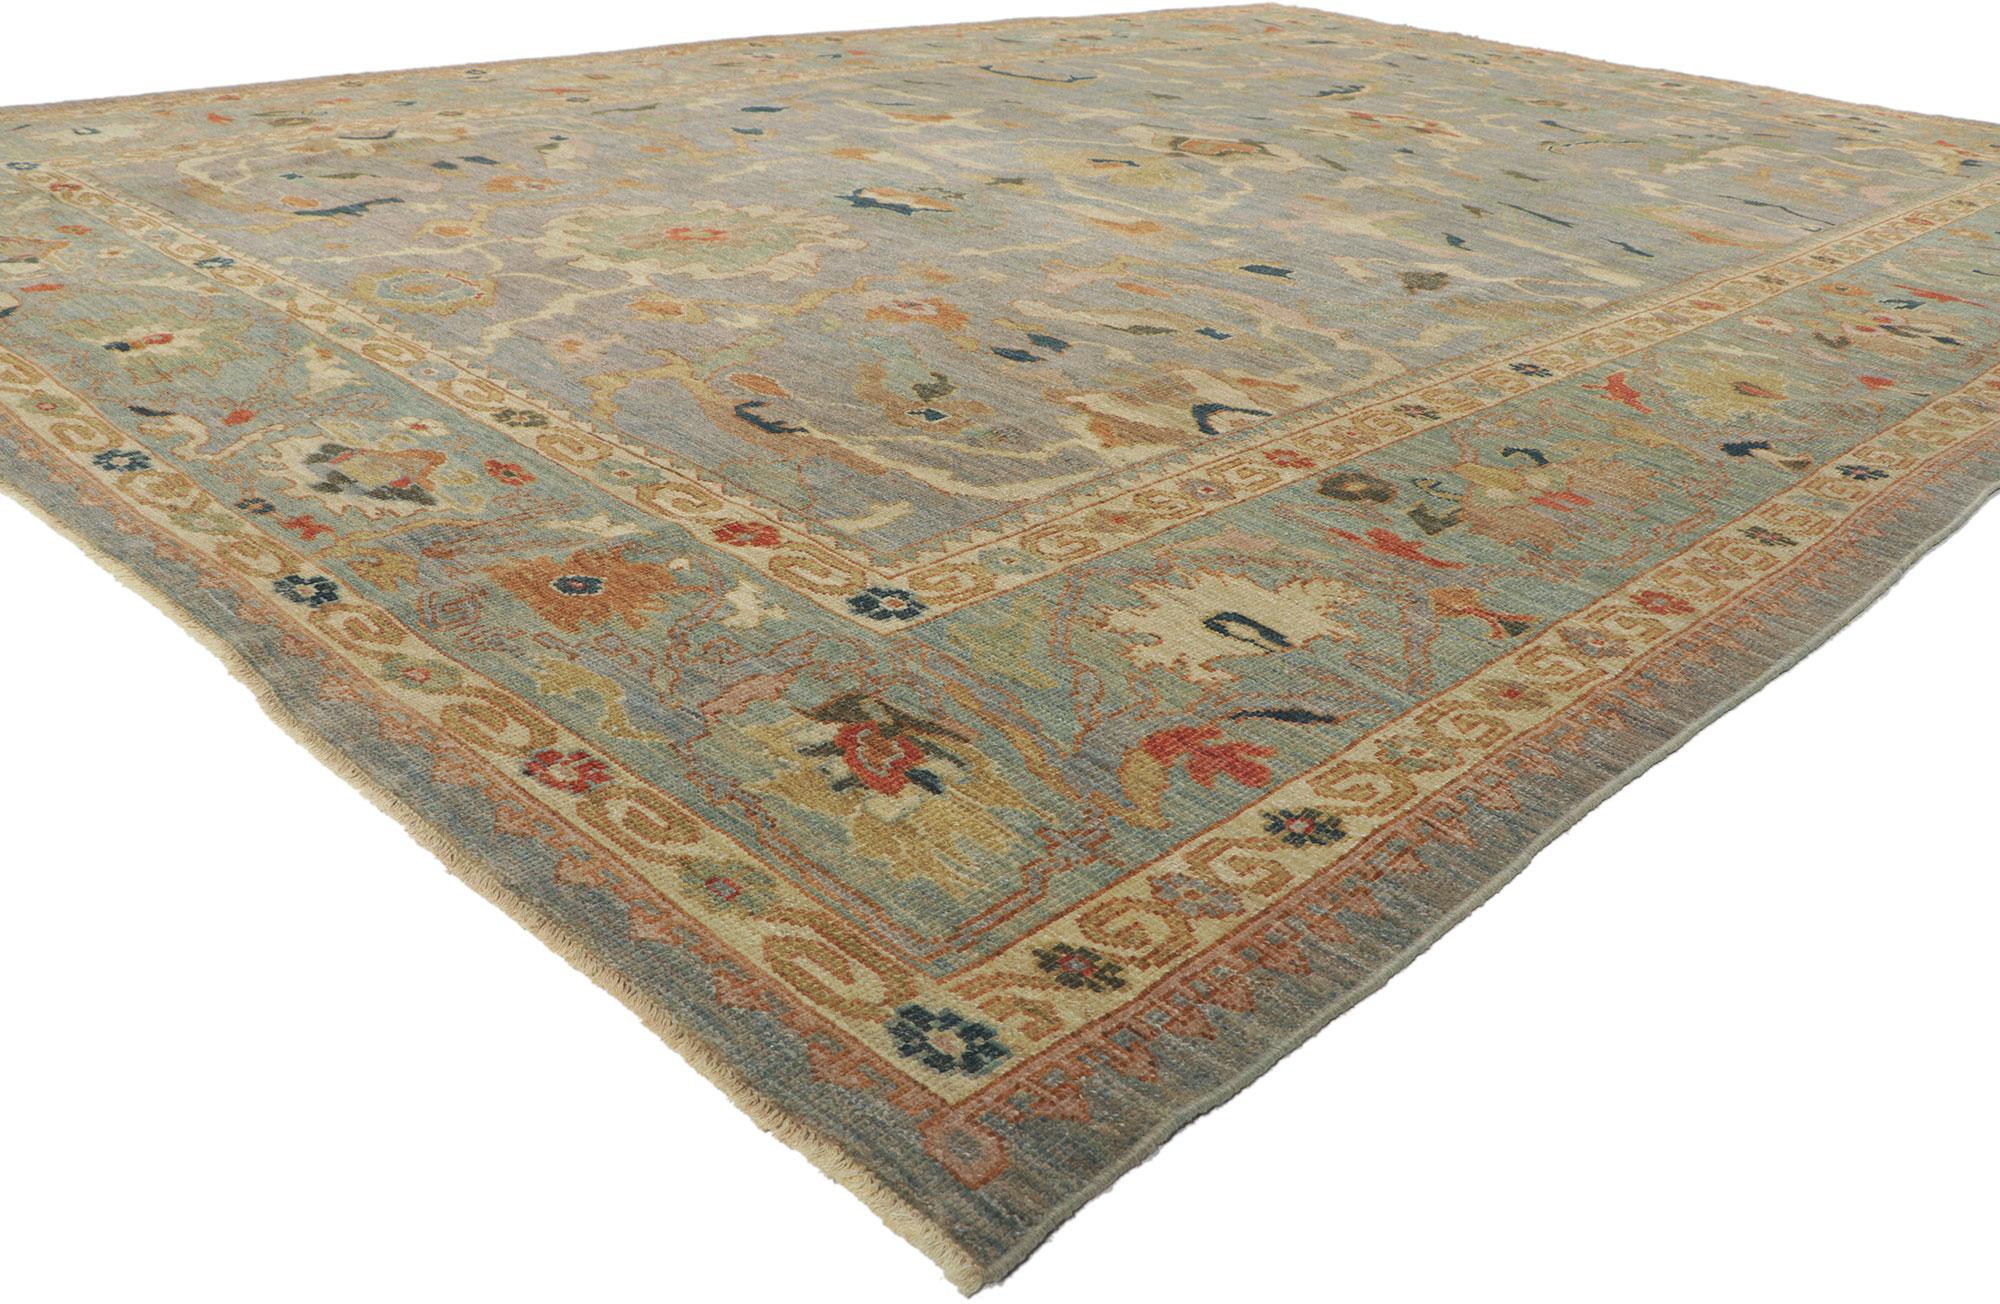 60708 Modern Blue Persian Sultanabad Rug, 09'10 x 14'00. Exhibiting both Organic Modern style and Biophilic Design principles, this hand-knotted wool Persian Sultanabad rug is a captivating manifestation of woven beauty. Its remarkable versatility,